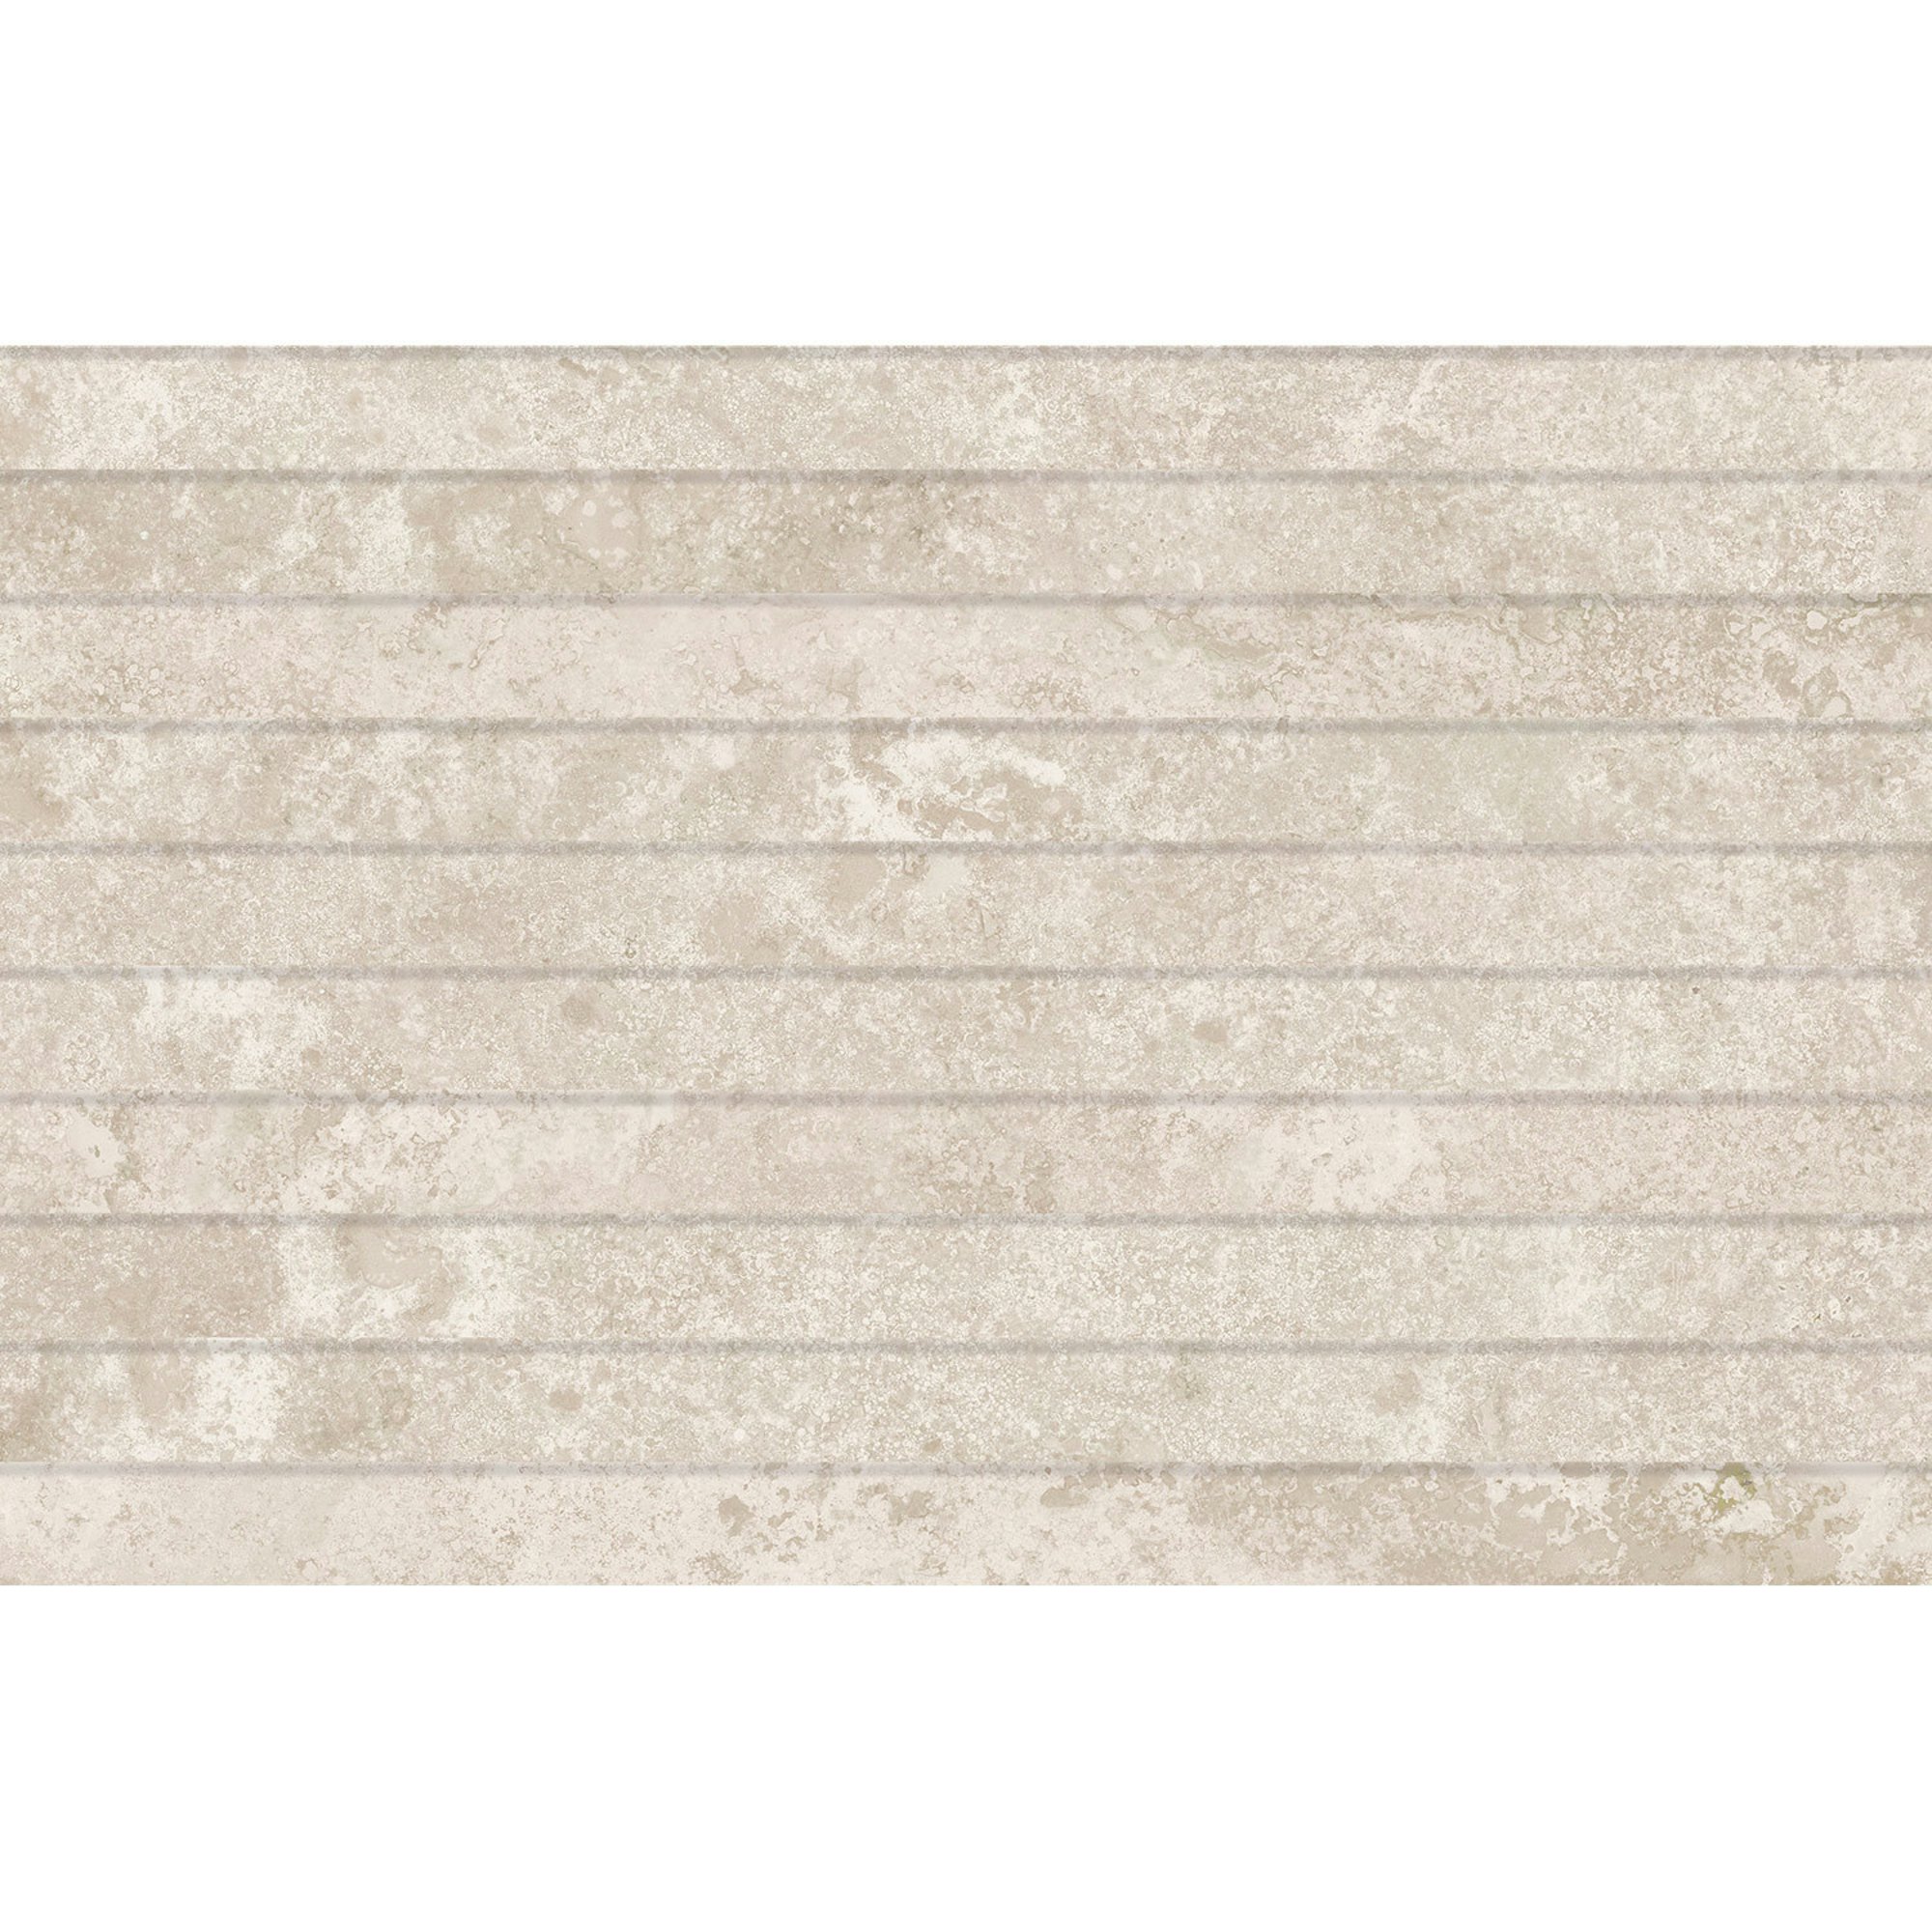 Essential Beige Carved Decor Wall Tile